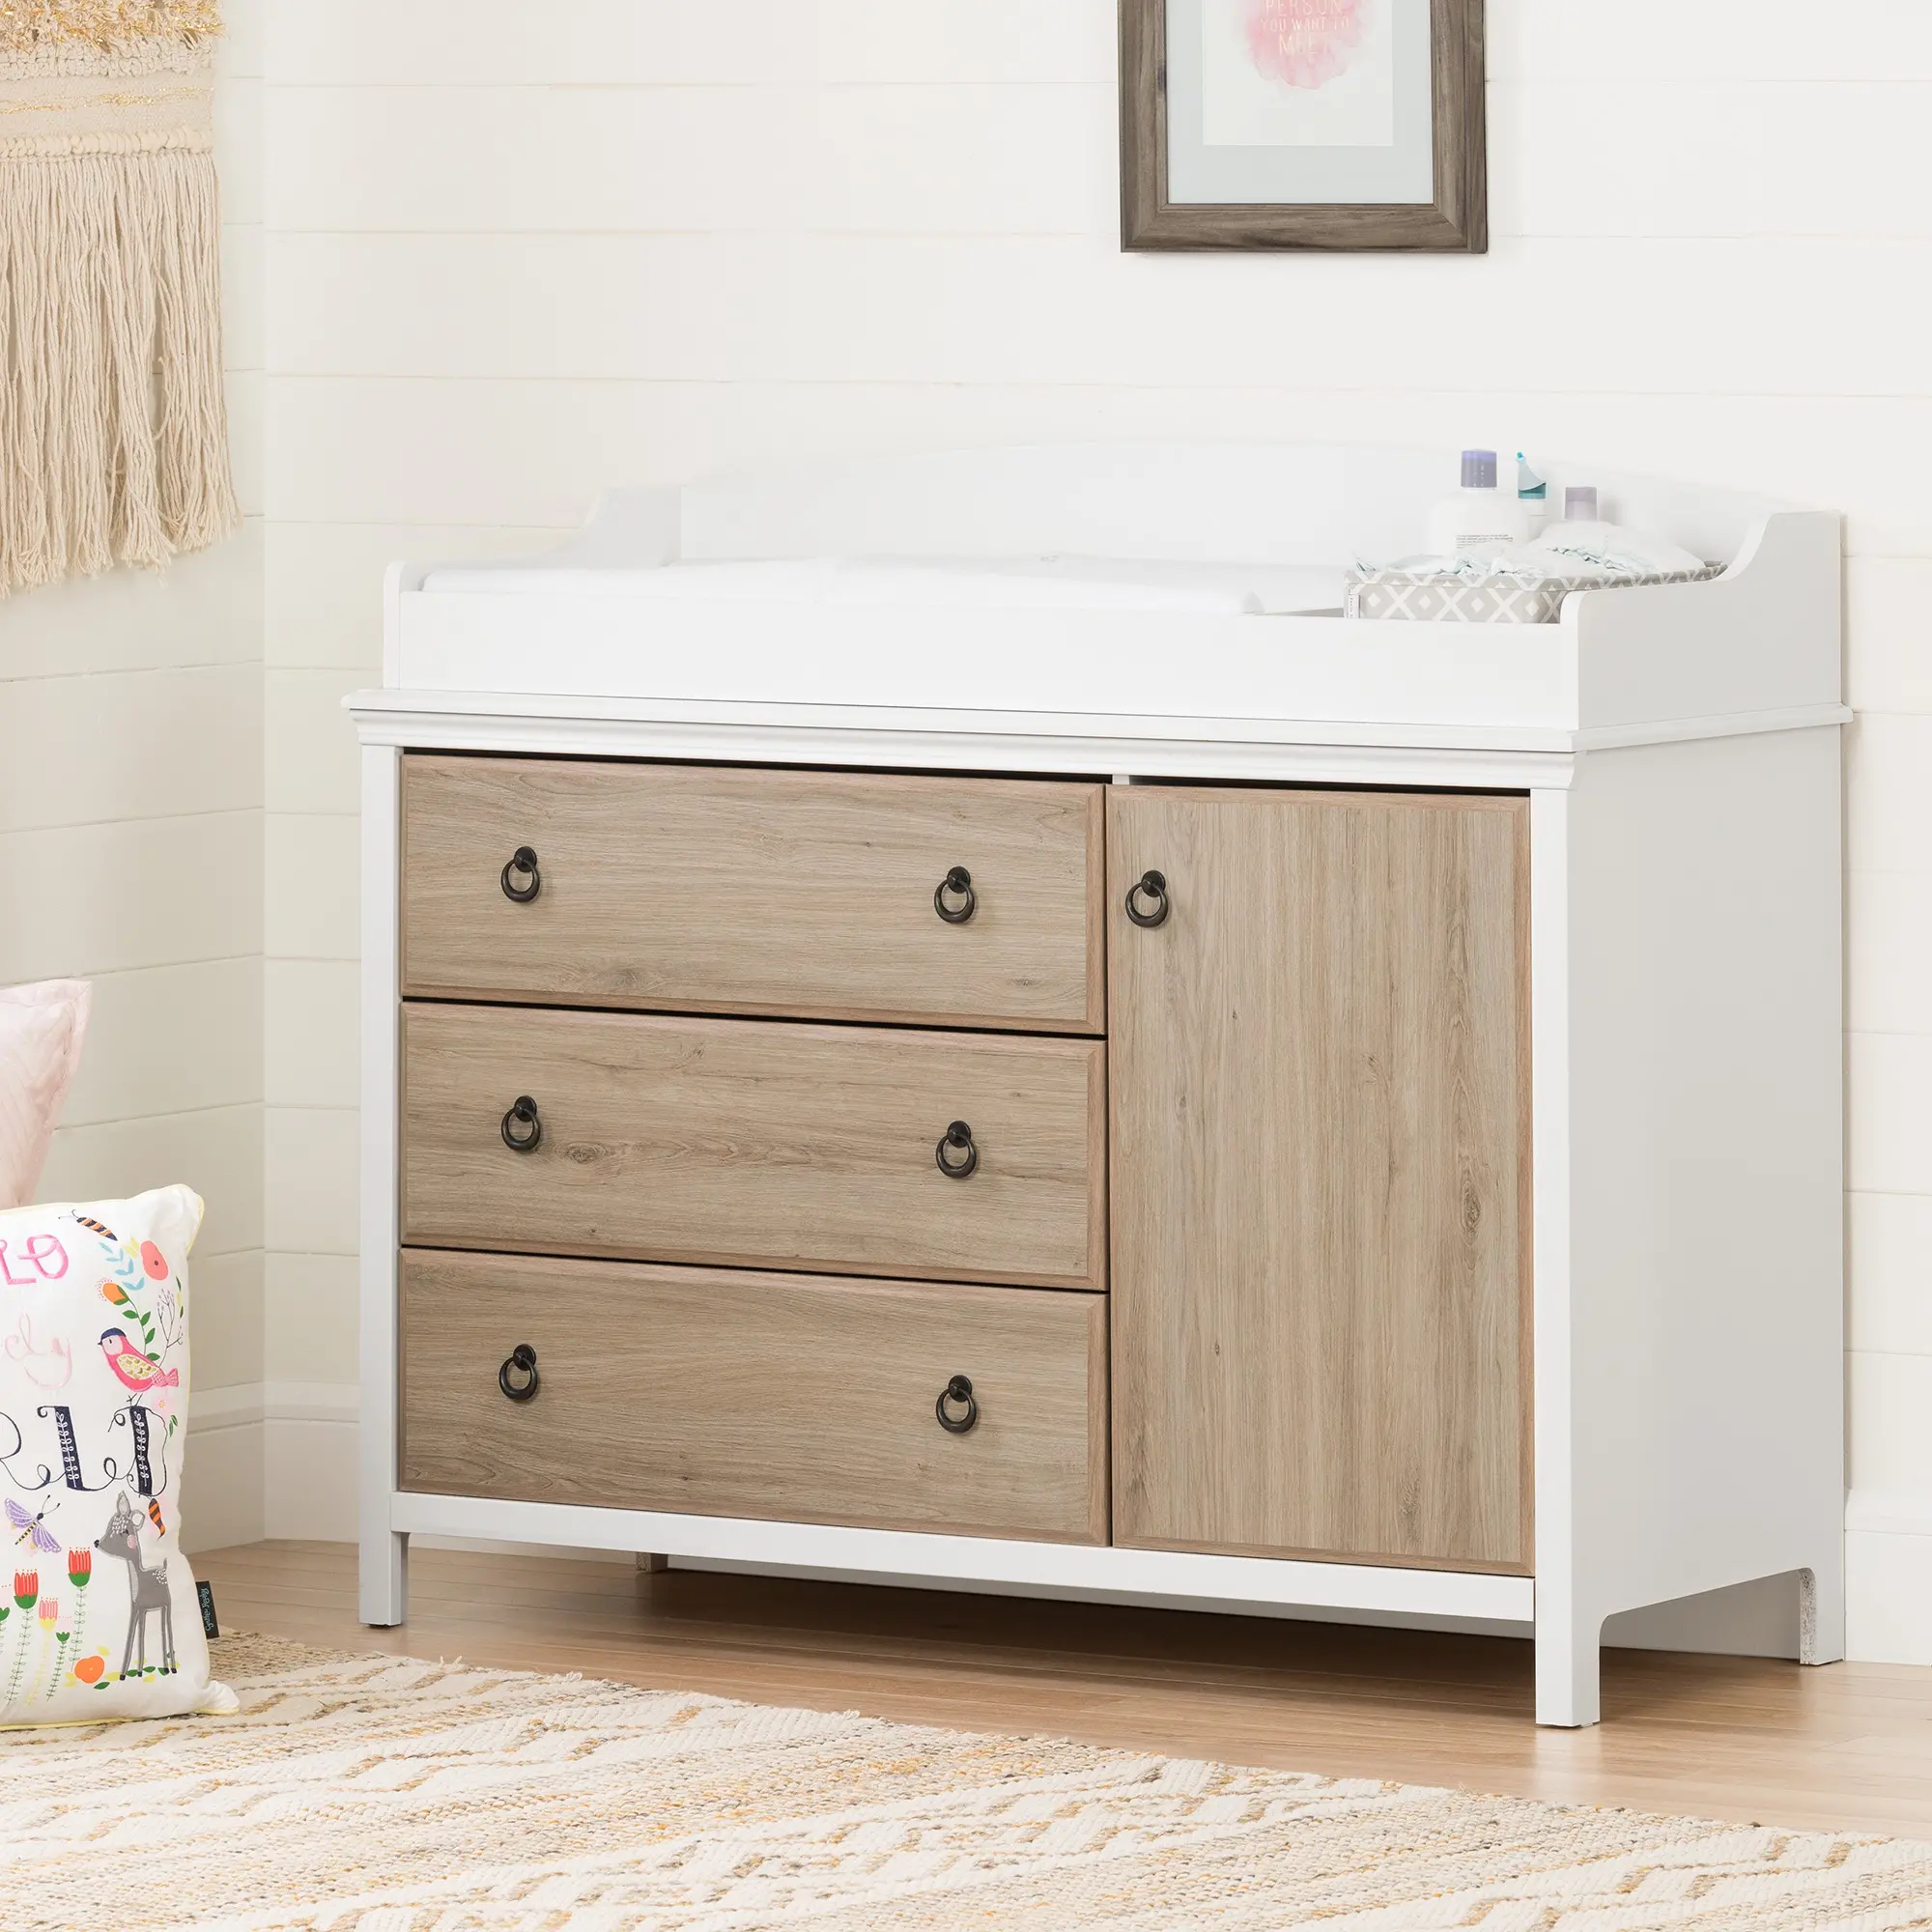 10624 Catimini Changing Table with Removable Changing St sku 10624